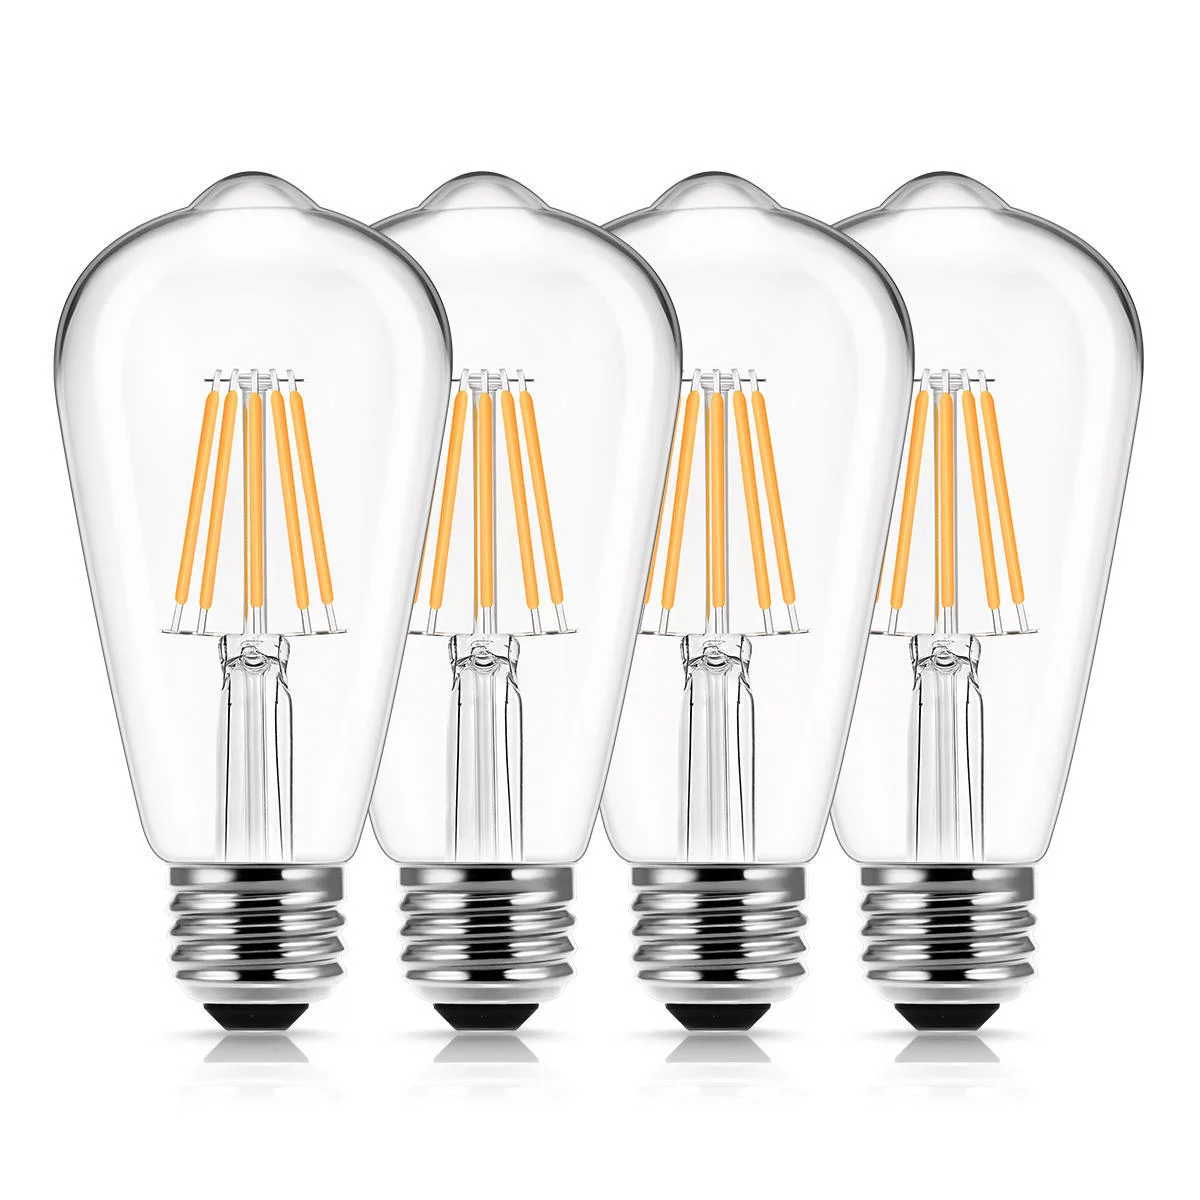 What LED Bulb Is Equivalent To 60 Watts